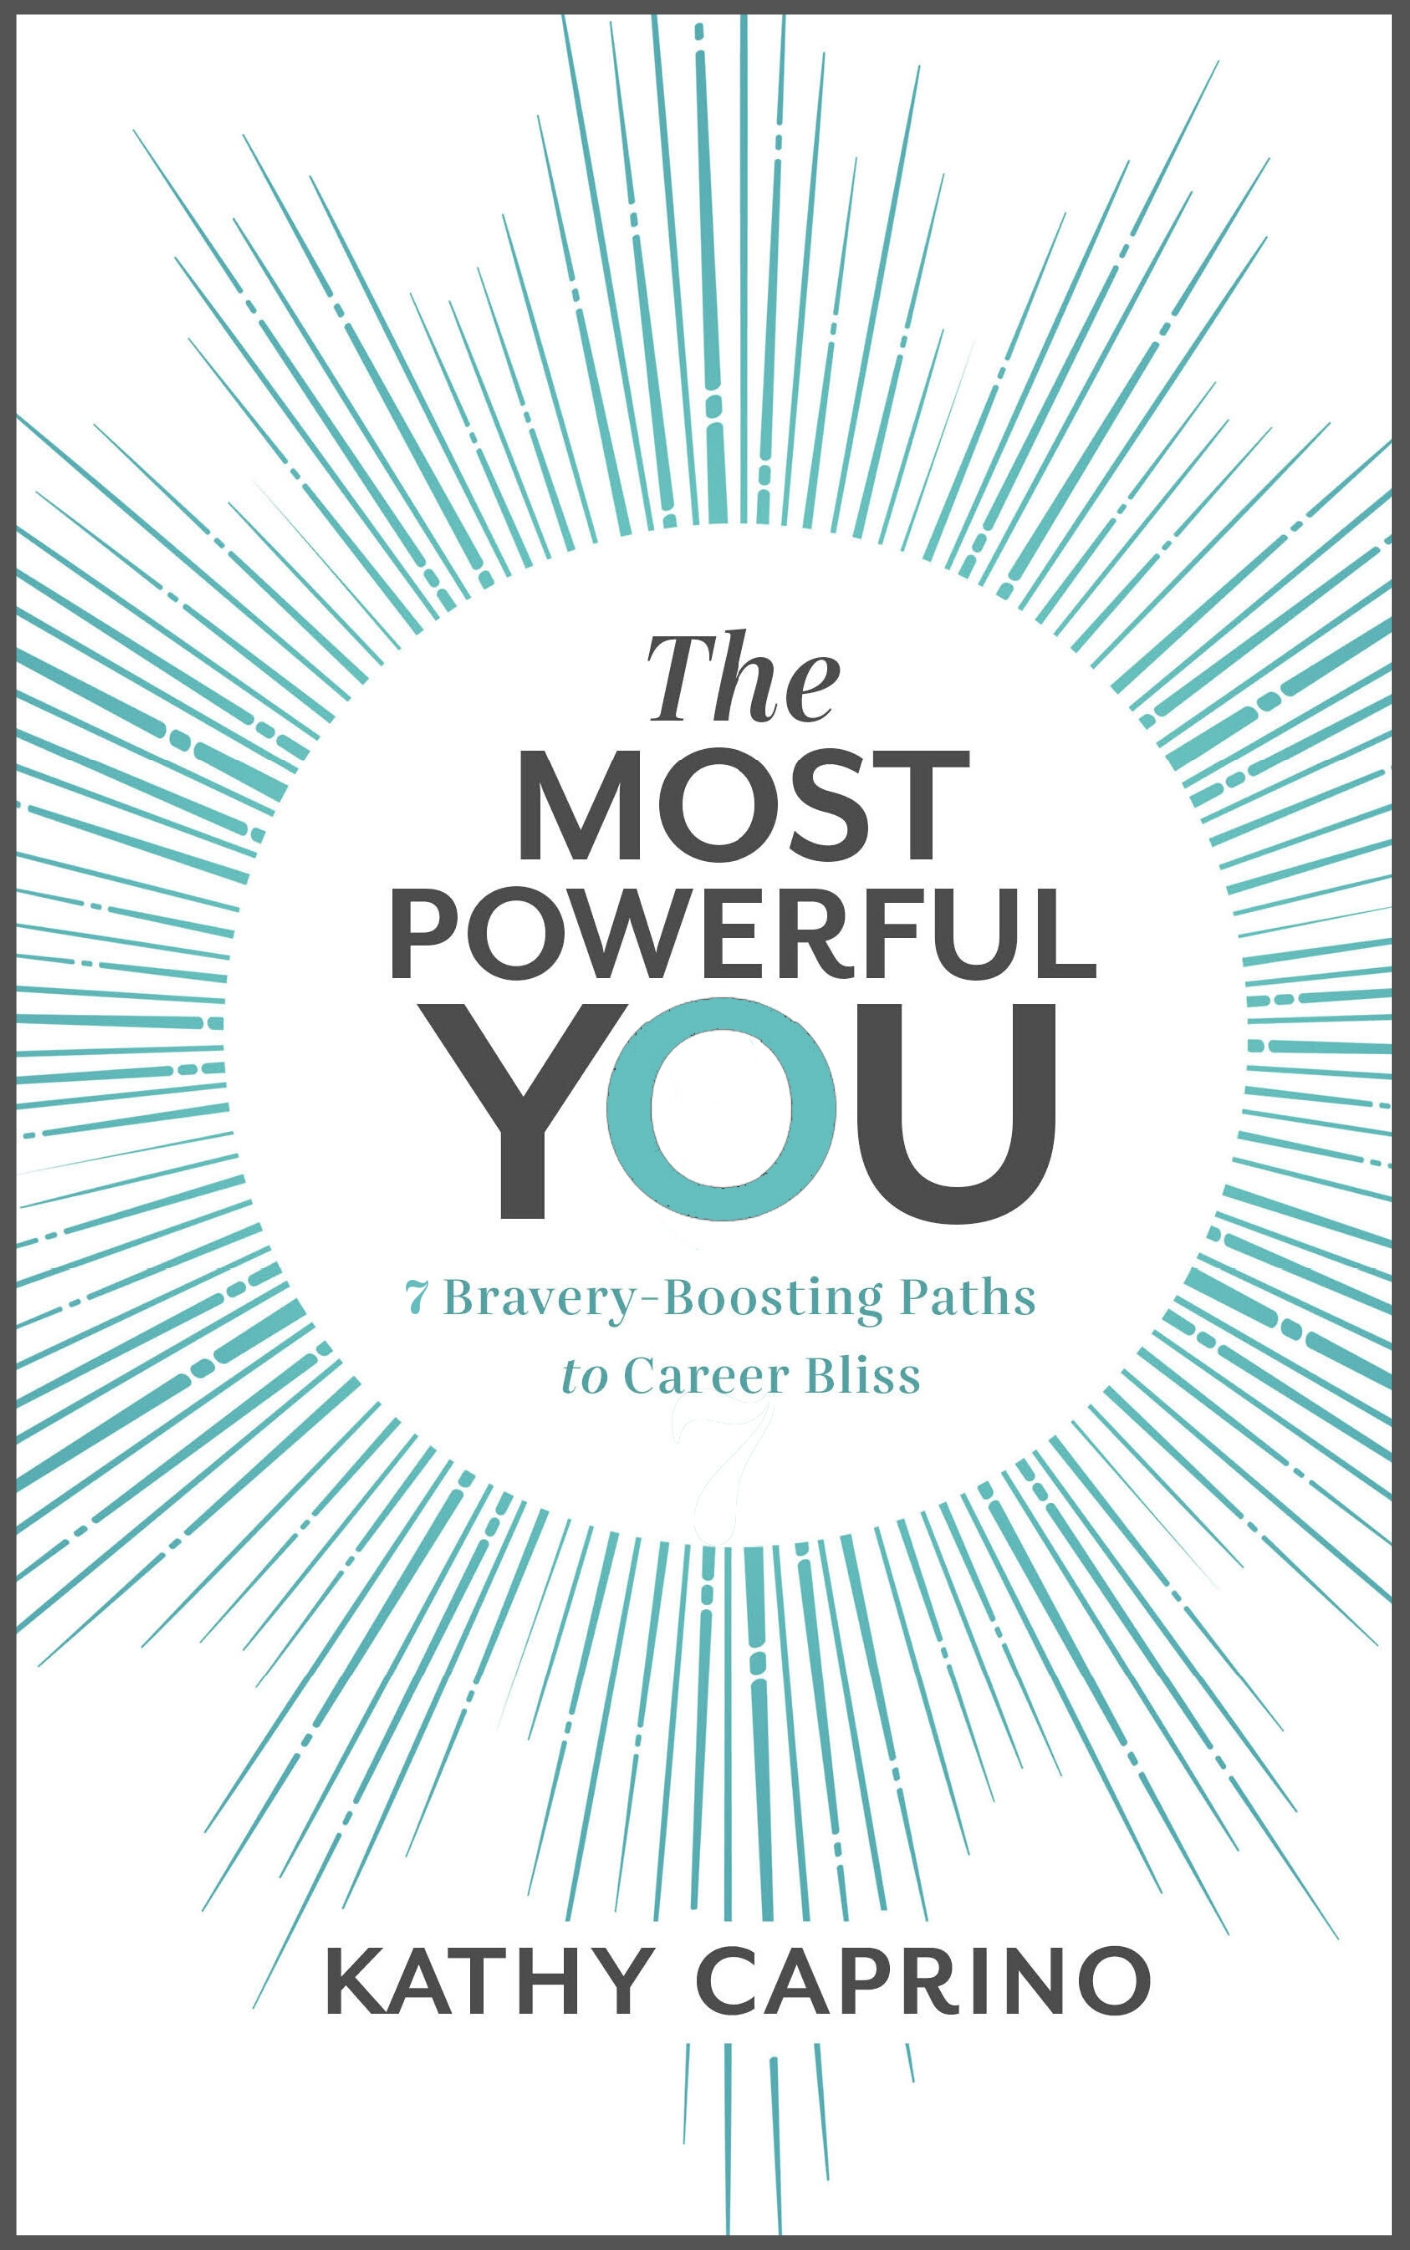 Most Powerful You by Kathy Caprino